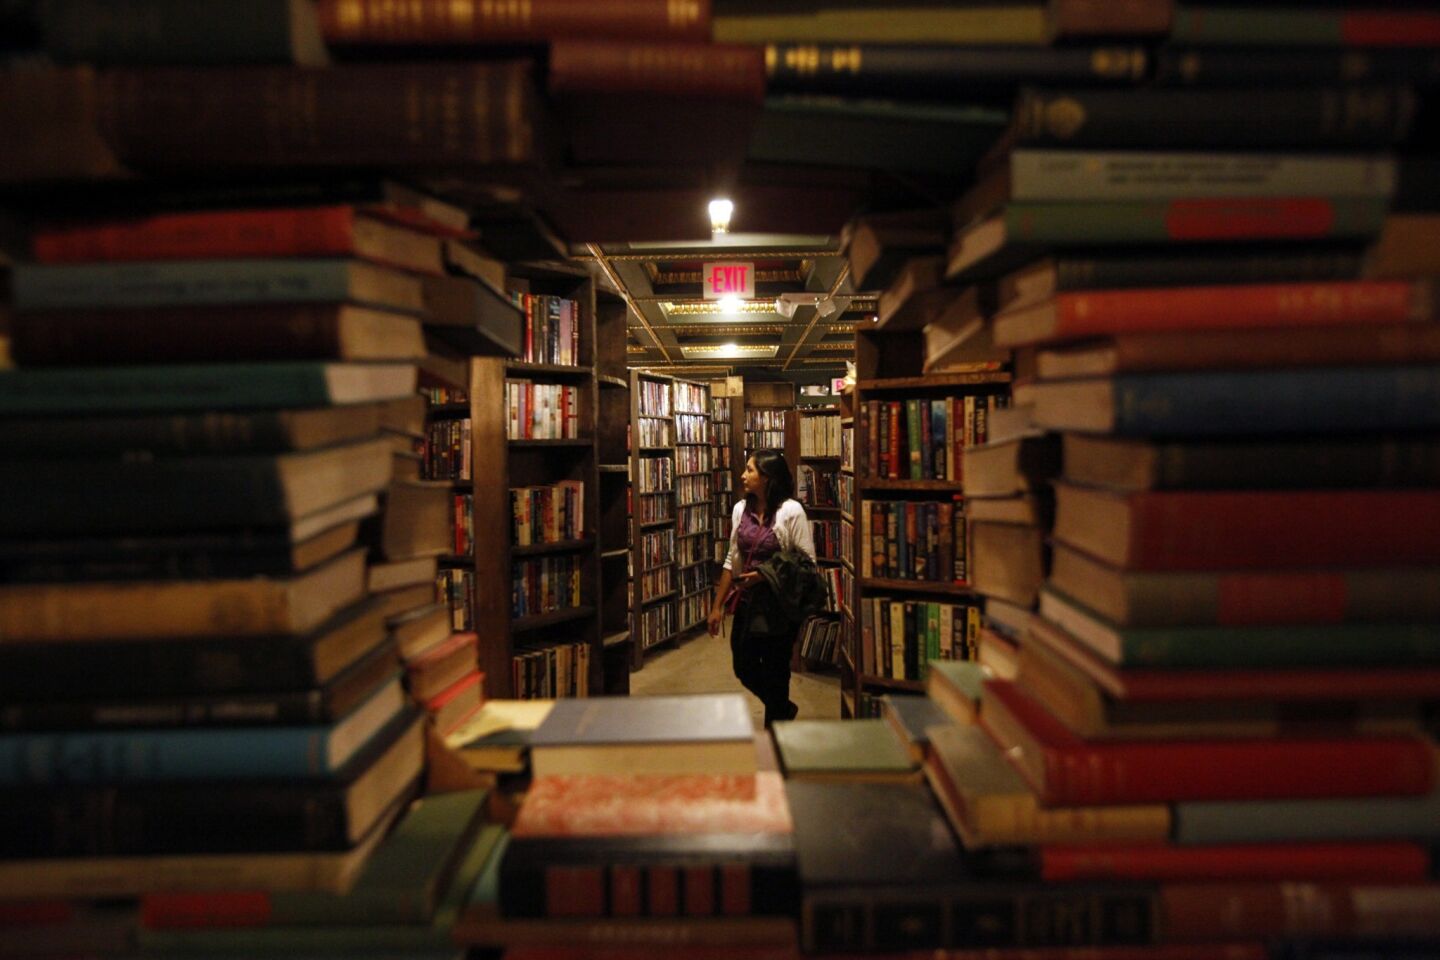 A visitor is framed by a portal surrounded by books.